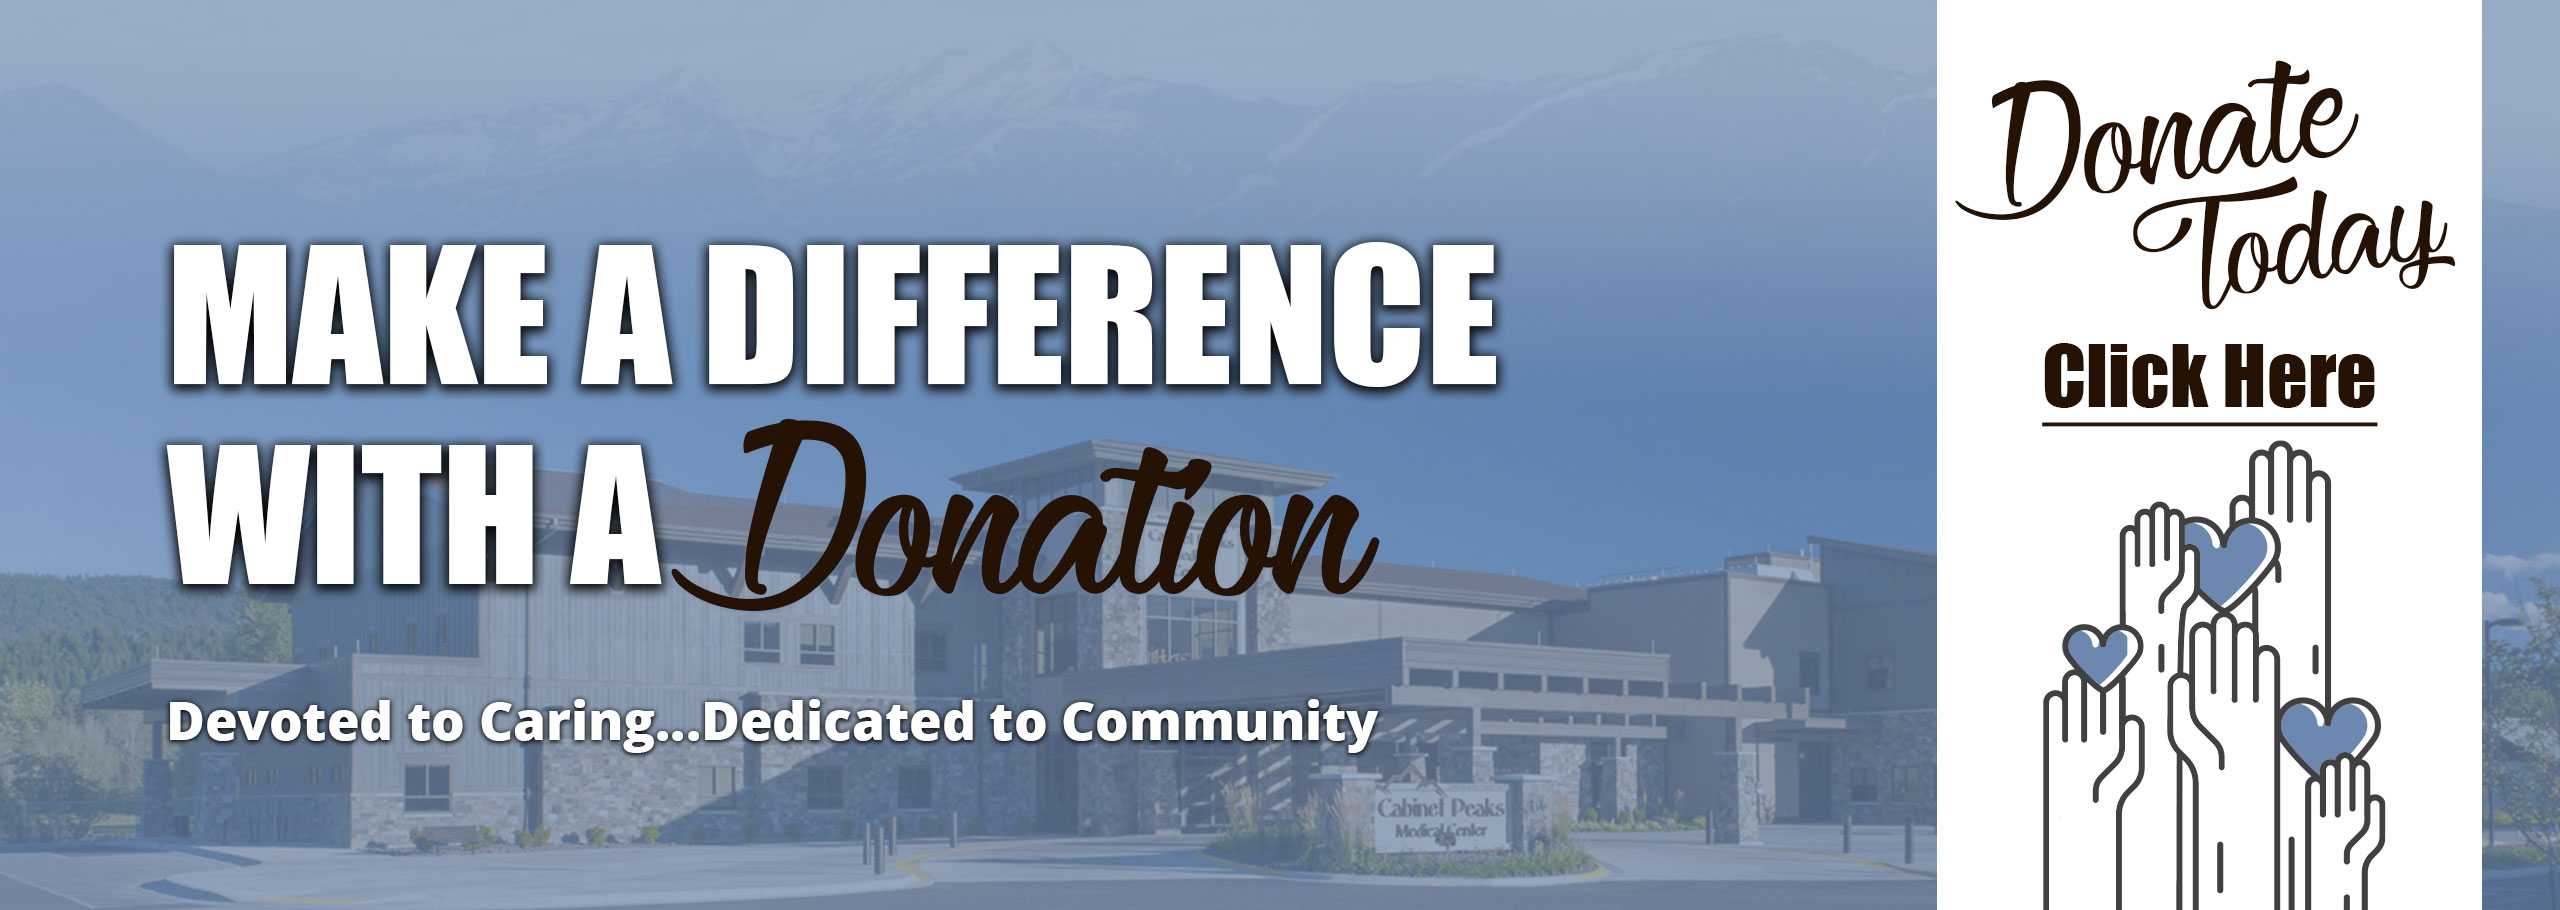 Make A Difference with a donation.
Devoted to Caring.. Dedicated to Community.
Donate Today by Clicking Here